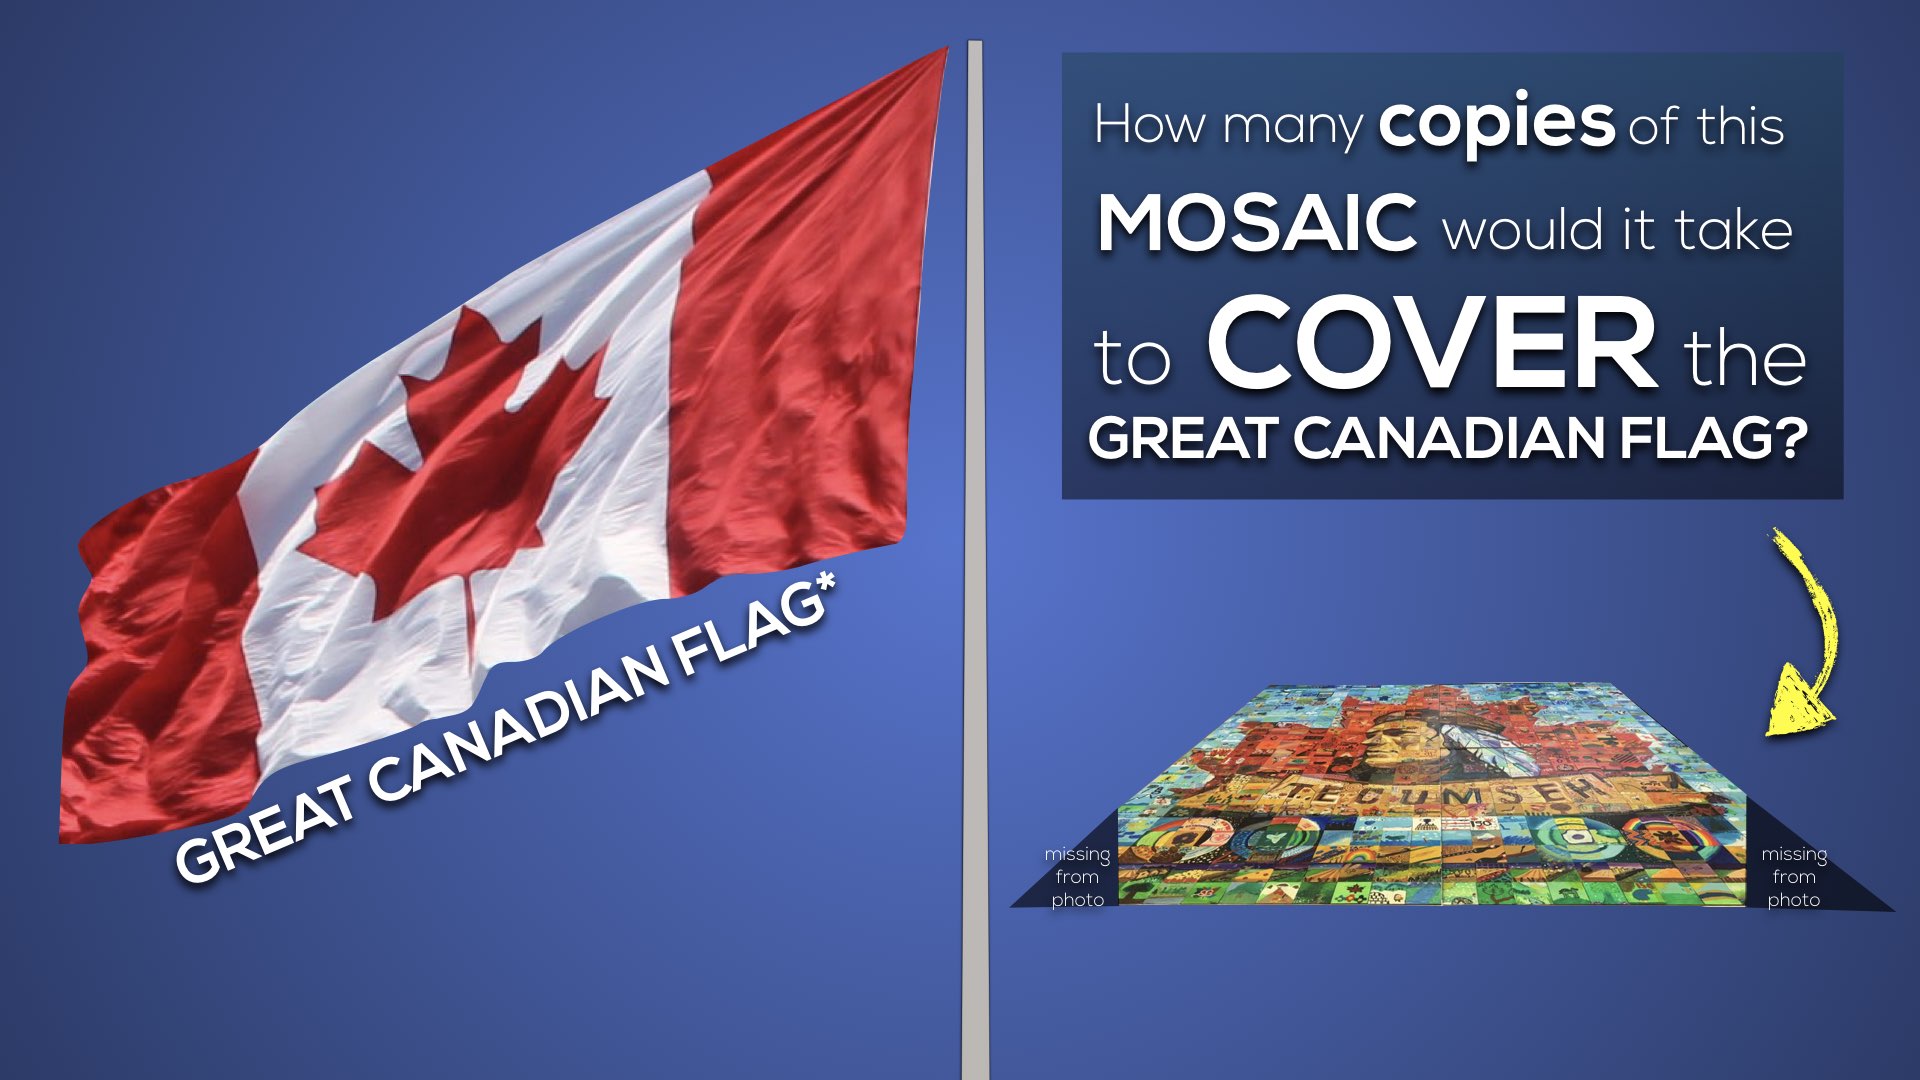 Massive Mosaic 3 Act Math Task 018 Extension 2 Act 1 How Many Mosaics Would It Take To Cover The Great Canadian Flag?